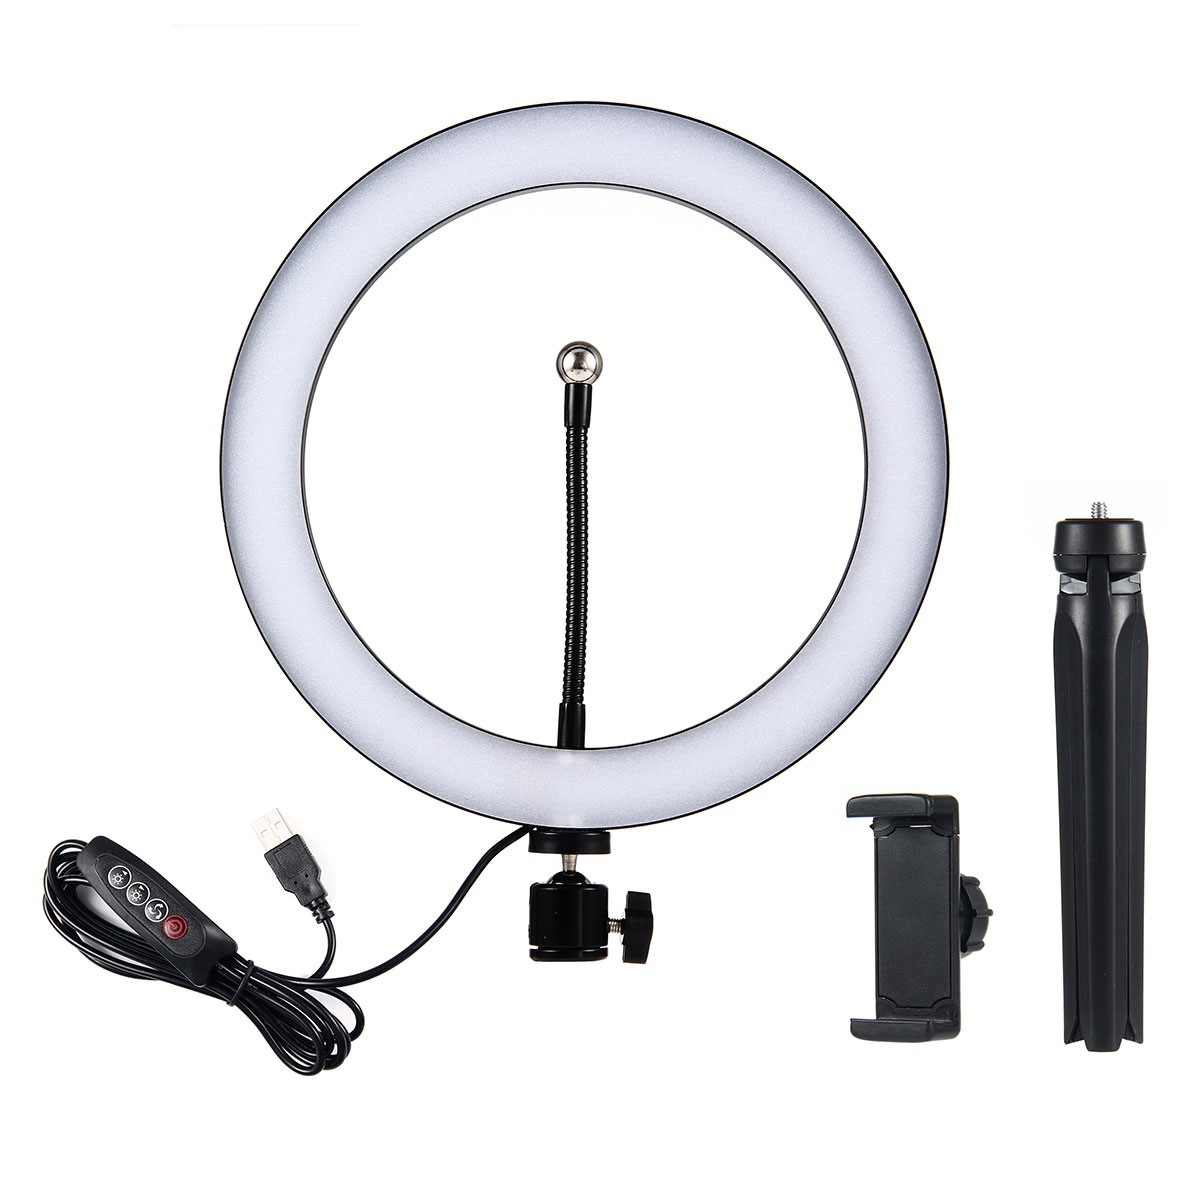 10-Inch-LED-Dimmable-3200K-5500K-Video-Ring-Light-with-Phone-Clip-Tripod-Head-Mini-Tripod-1492115